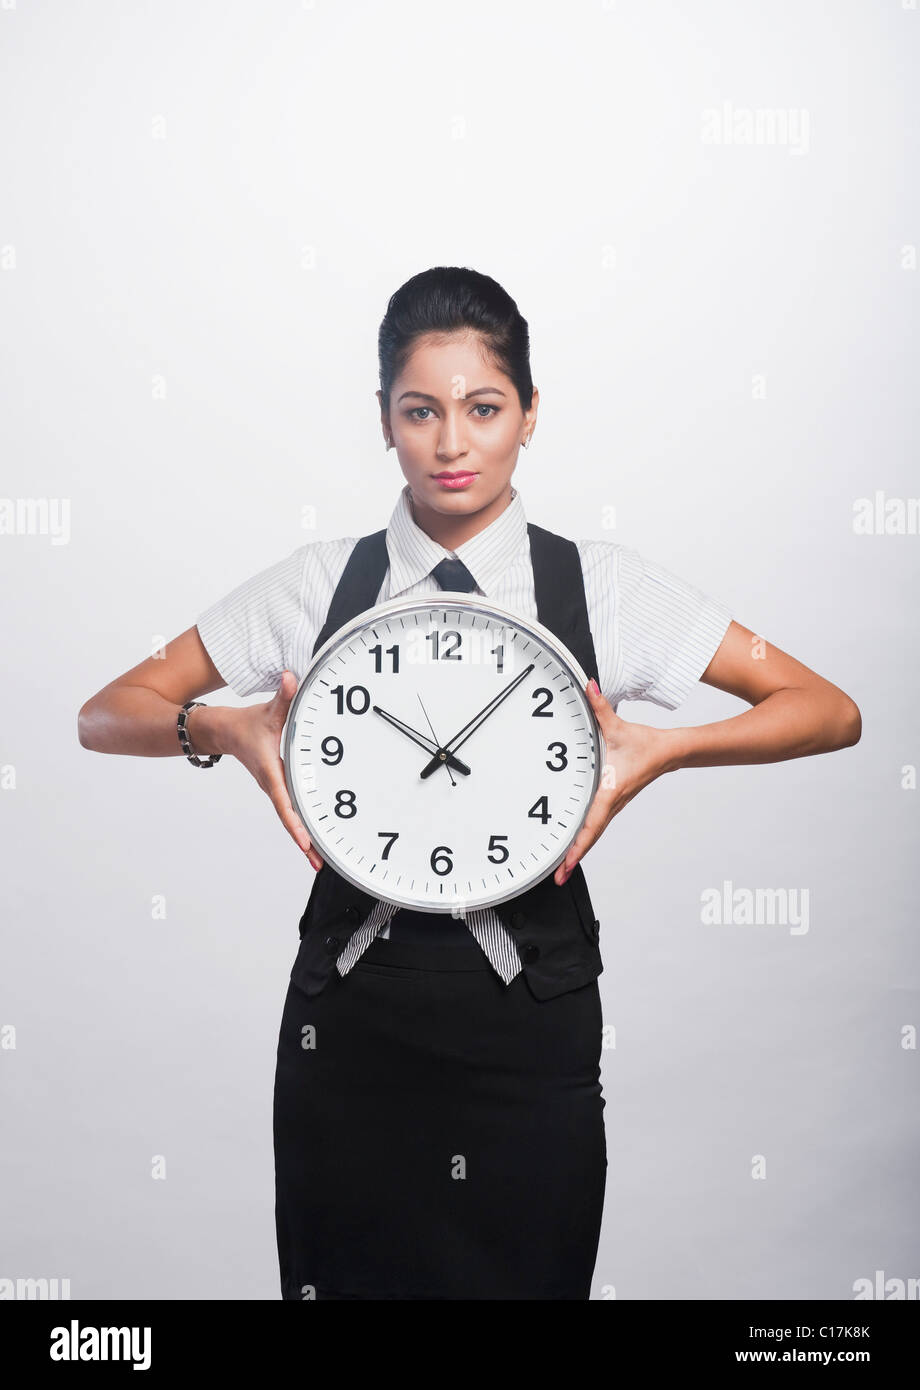 Portrait of a businesswoman holding a clock Stock Photo